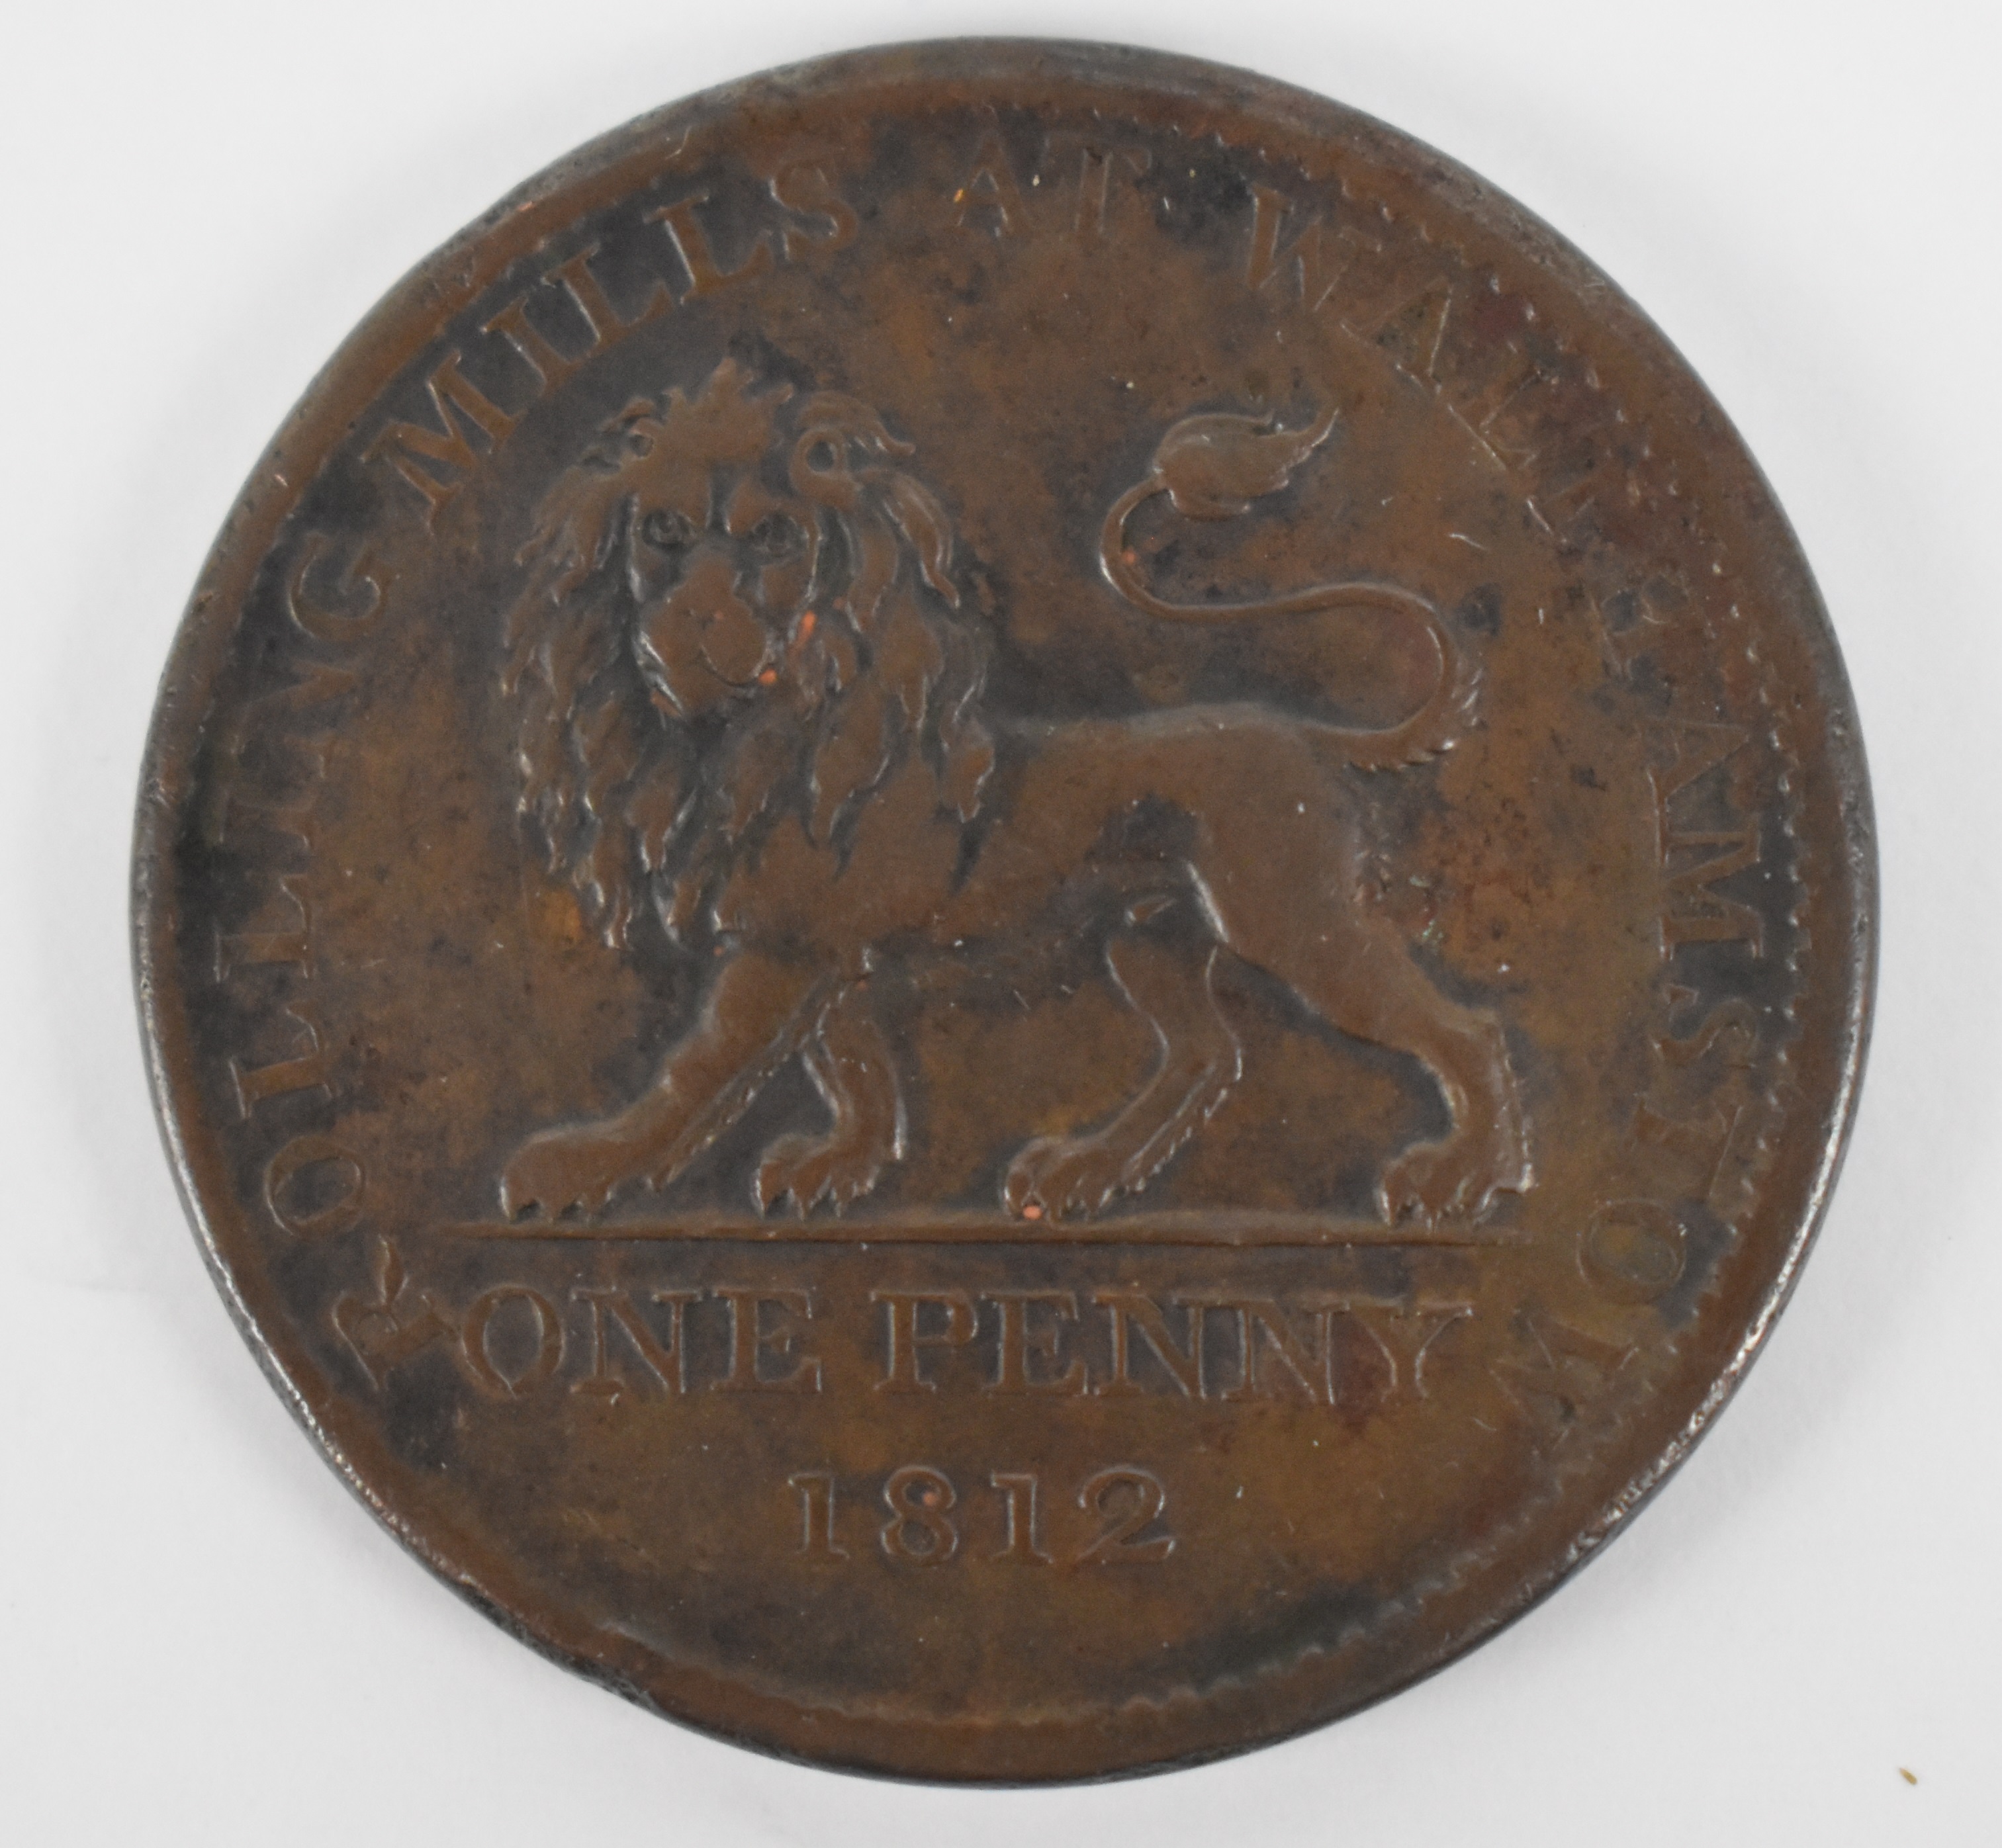 1812 Walthamstow British Copper Company Rolling Mills one penny token - Image 3 of 4